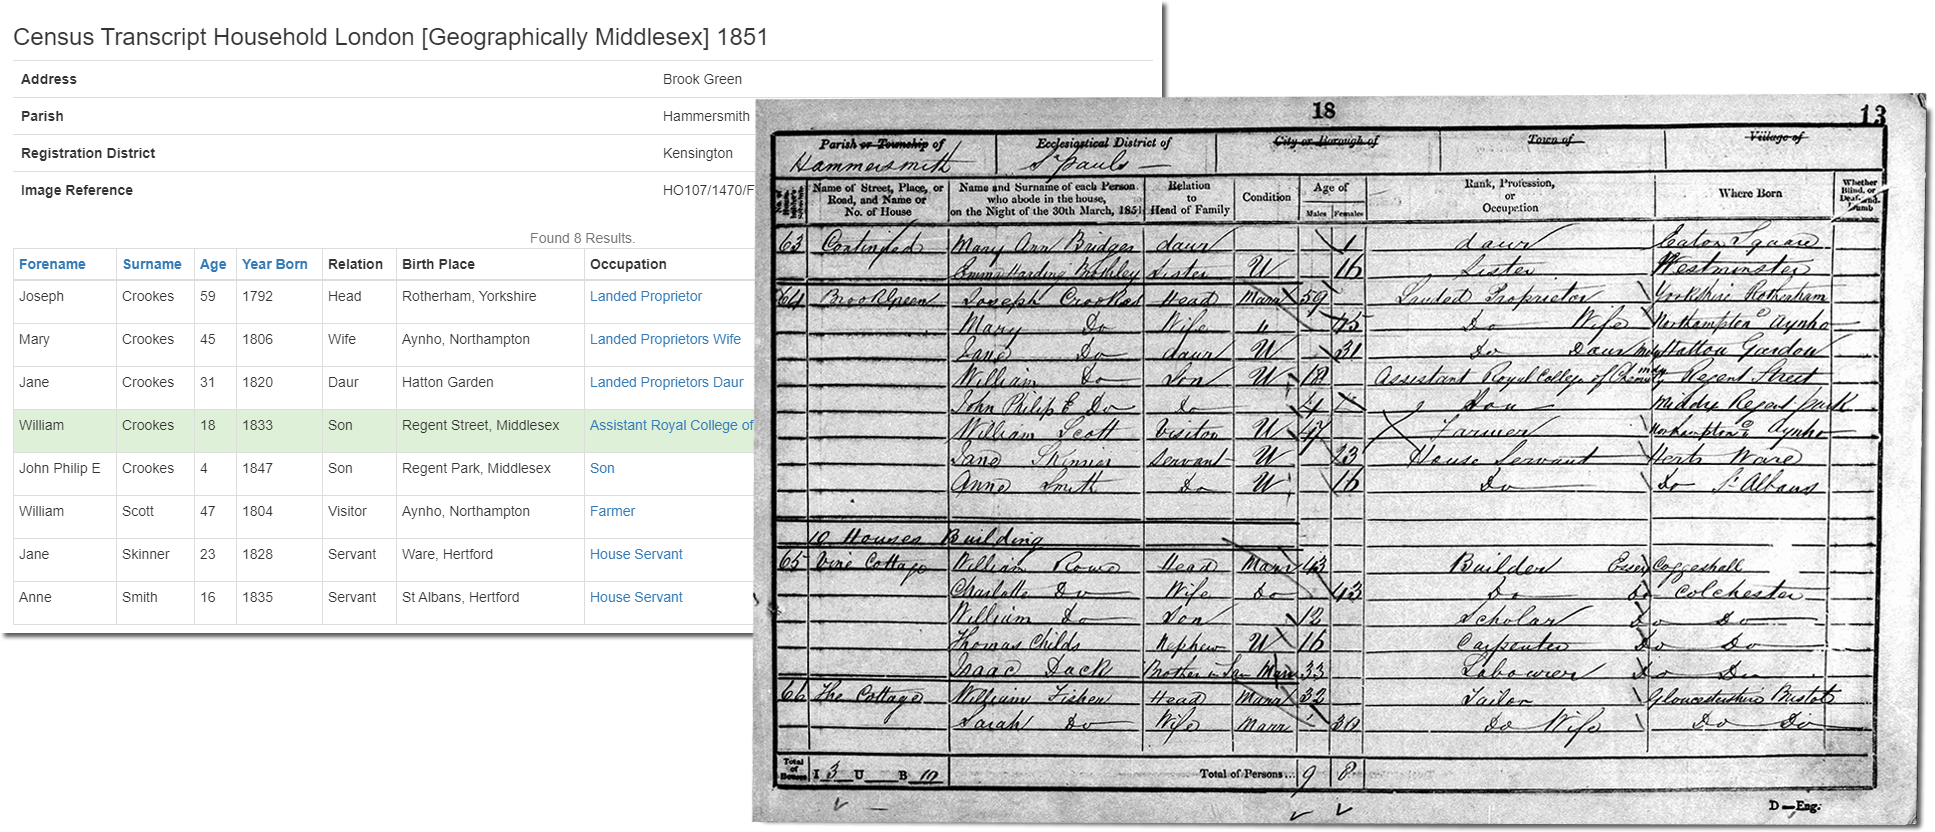 Sir William Crookes in the 1851 Census on TheGenealogist